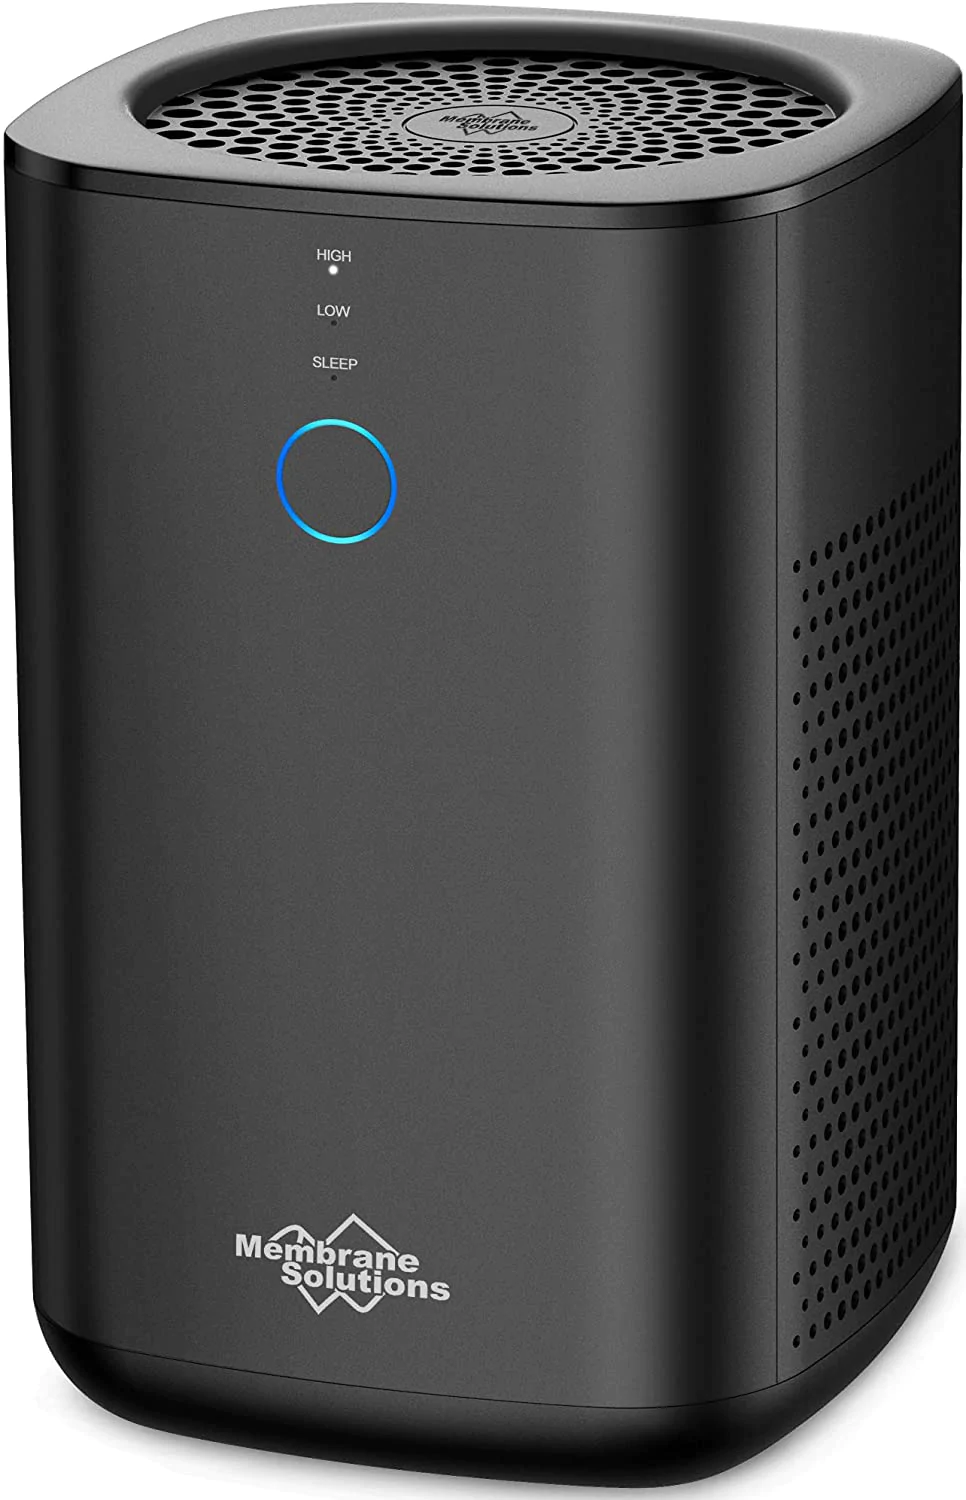 The value you should choose an air purifier